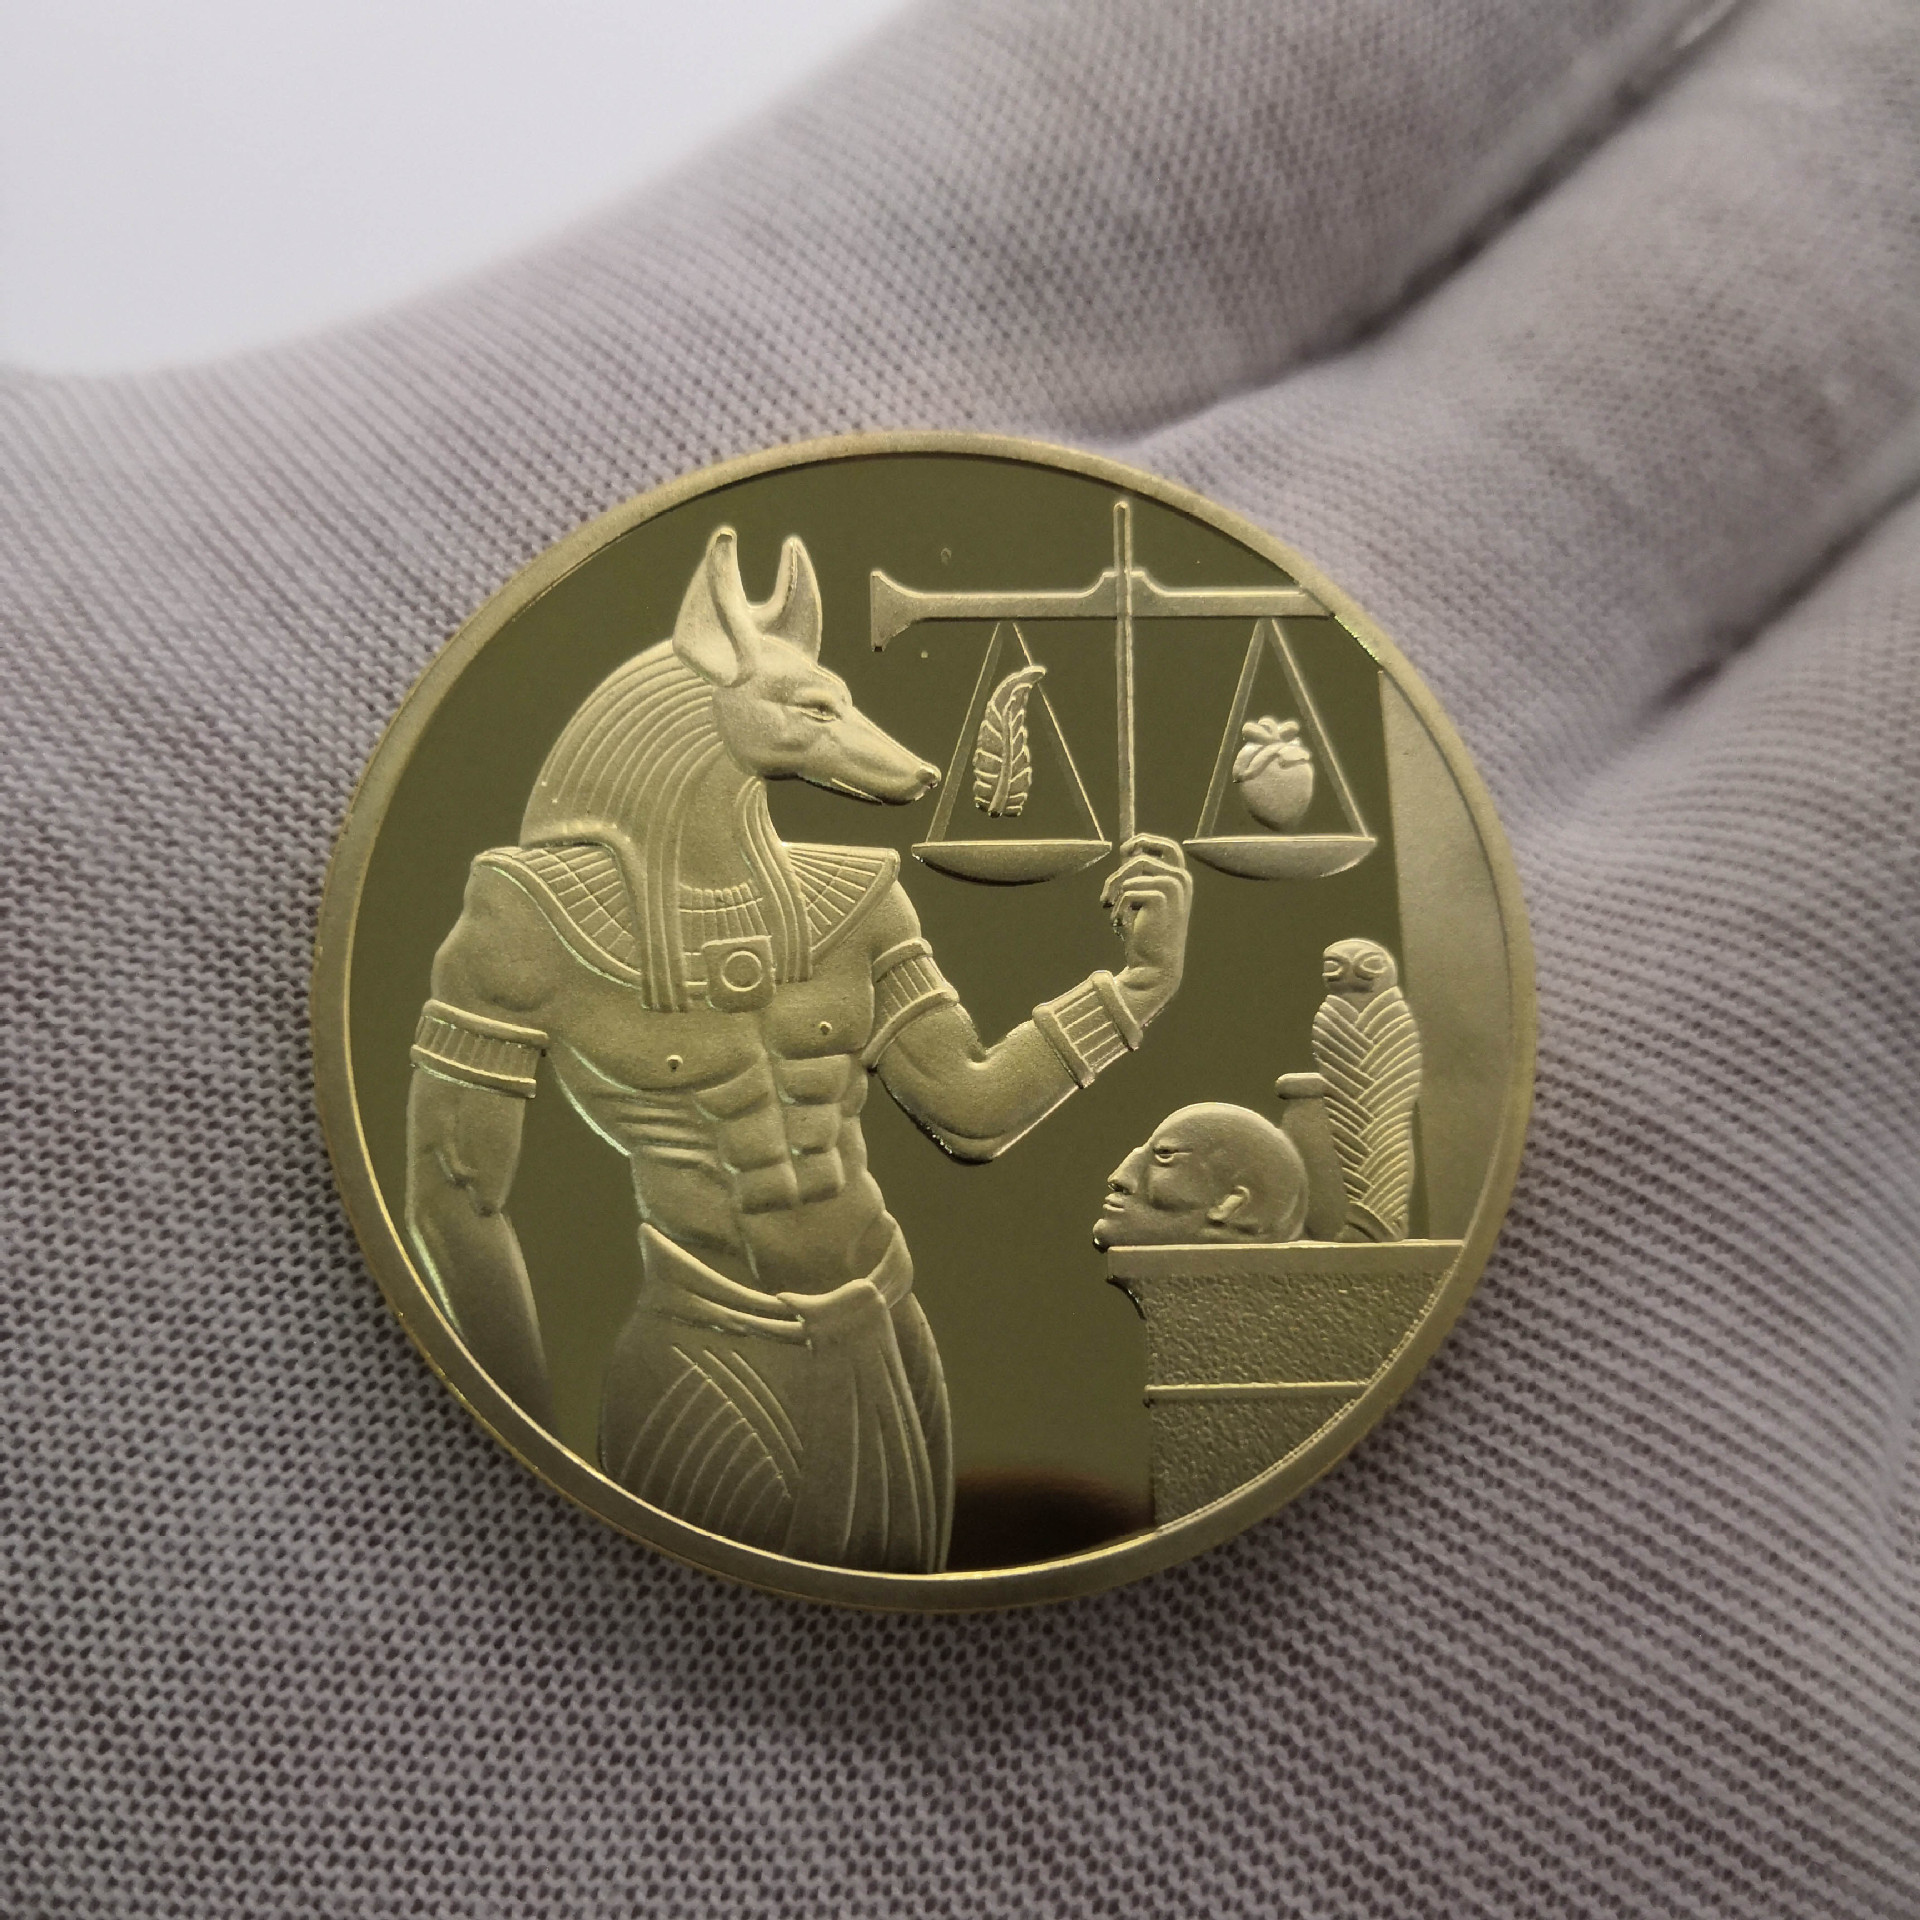 Arts and Crafts Commemorative coin of ancient Egyptian pharaoh Anubis commemorative coin gold coin